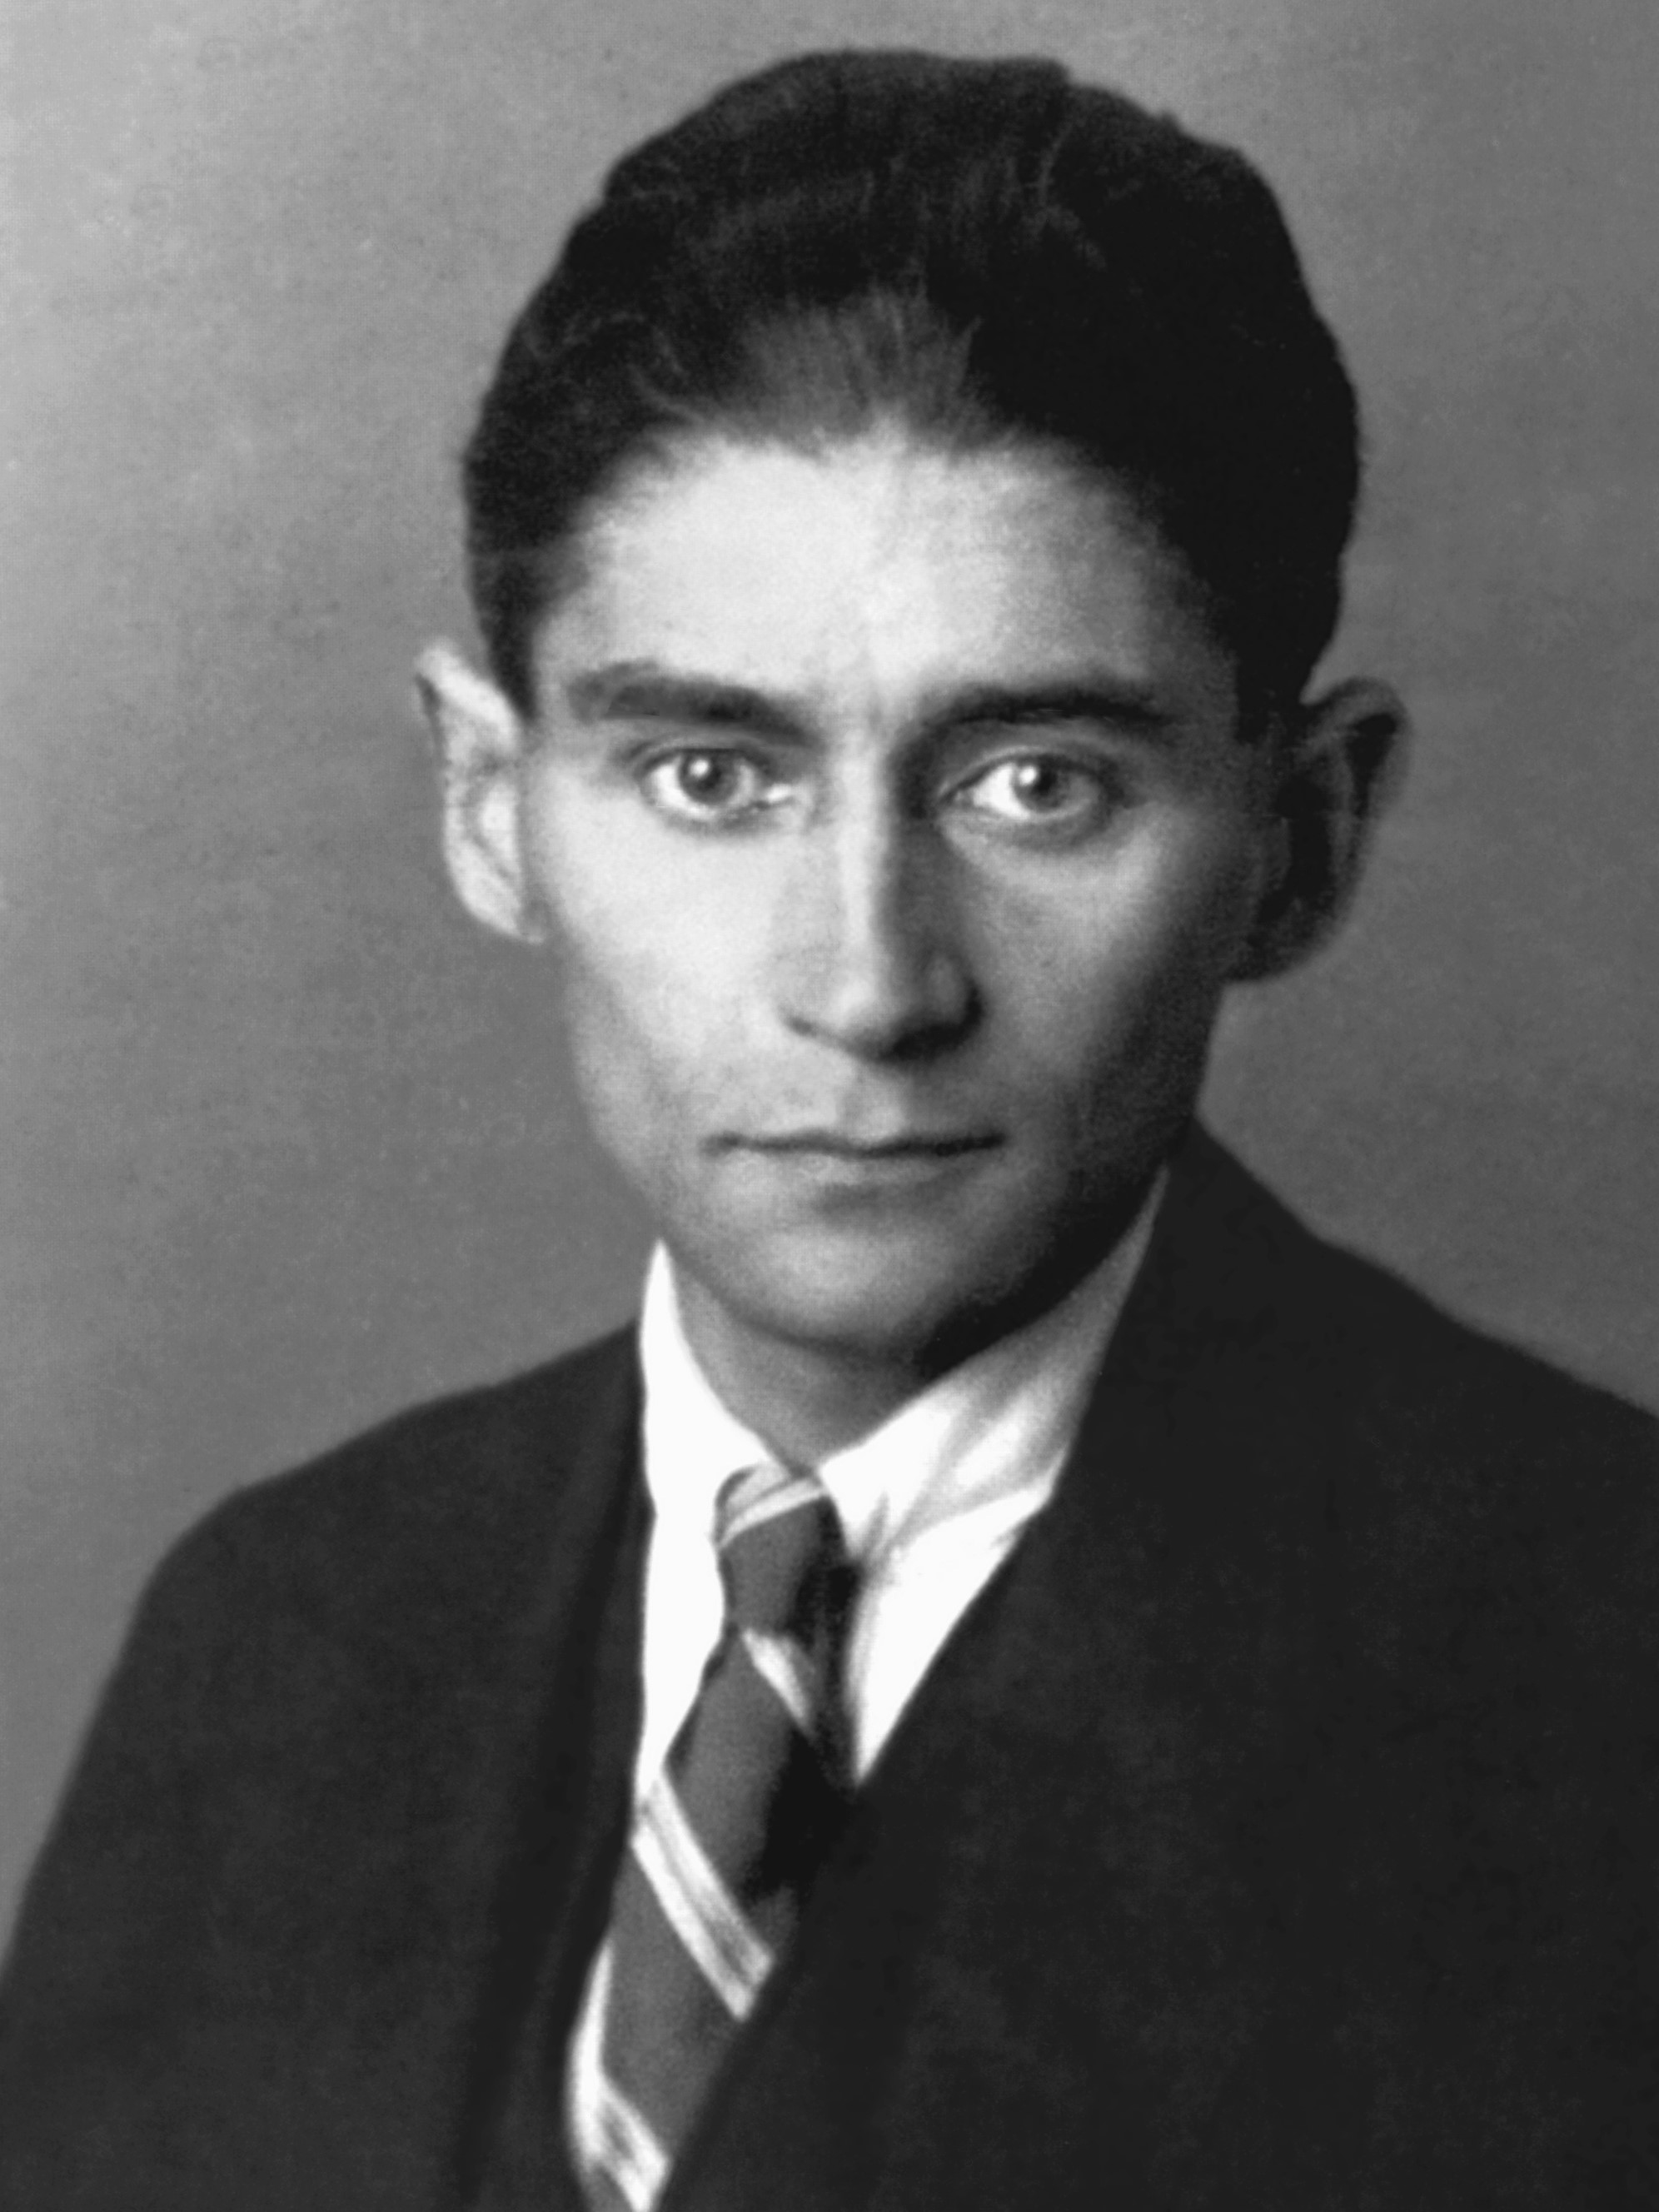 Black and white pic of 1920s young man in suit